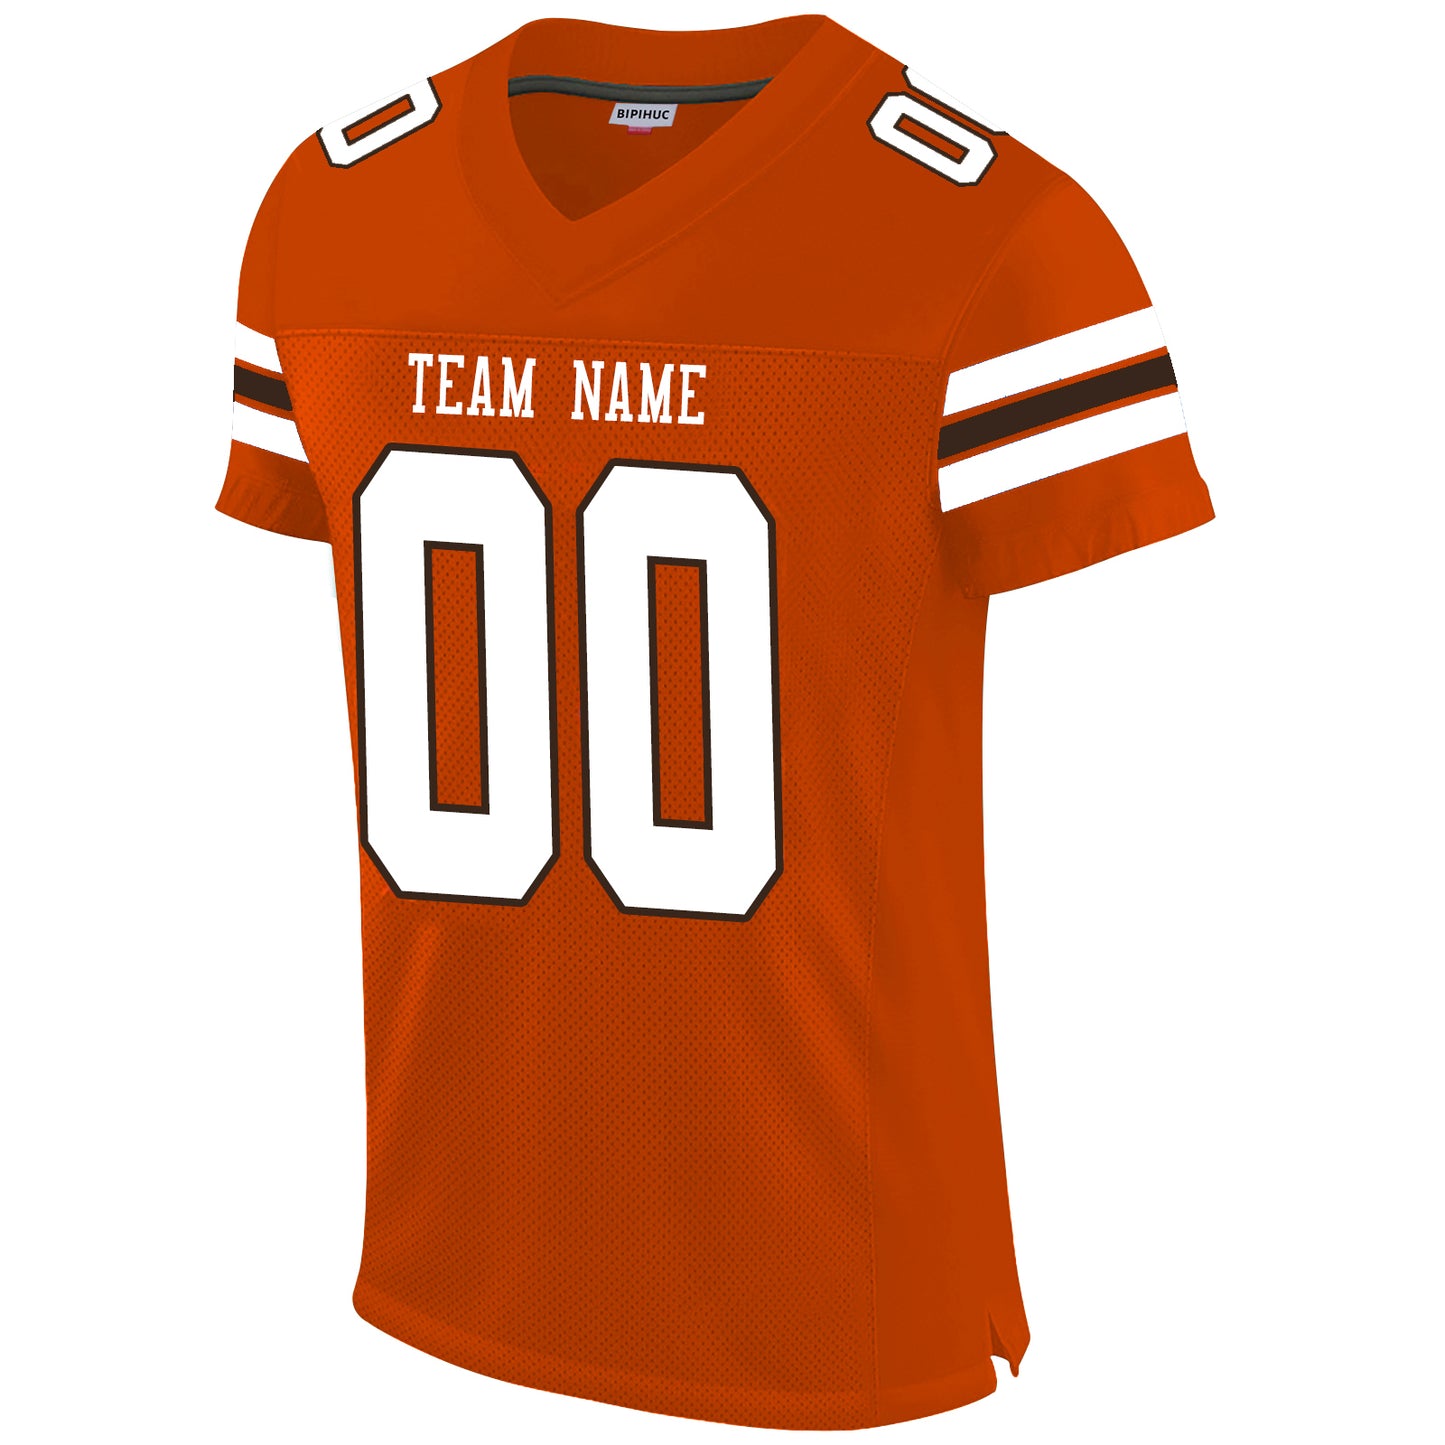 Custom Football Jersey for Men Women Youth Personalize Sports Shirt Design Orange Stitched Name And Number Size S to 6XL Christmas Birthday Gift